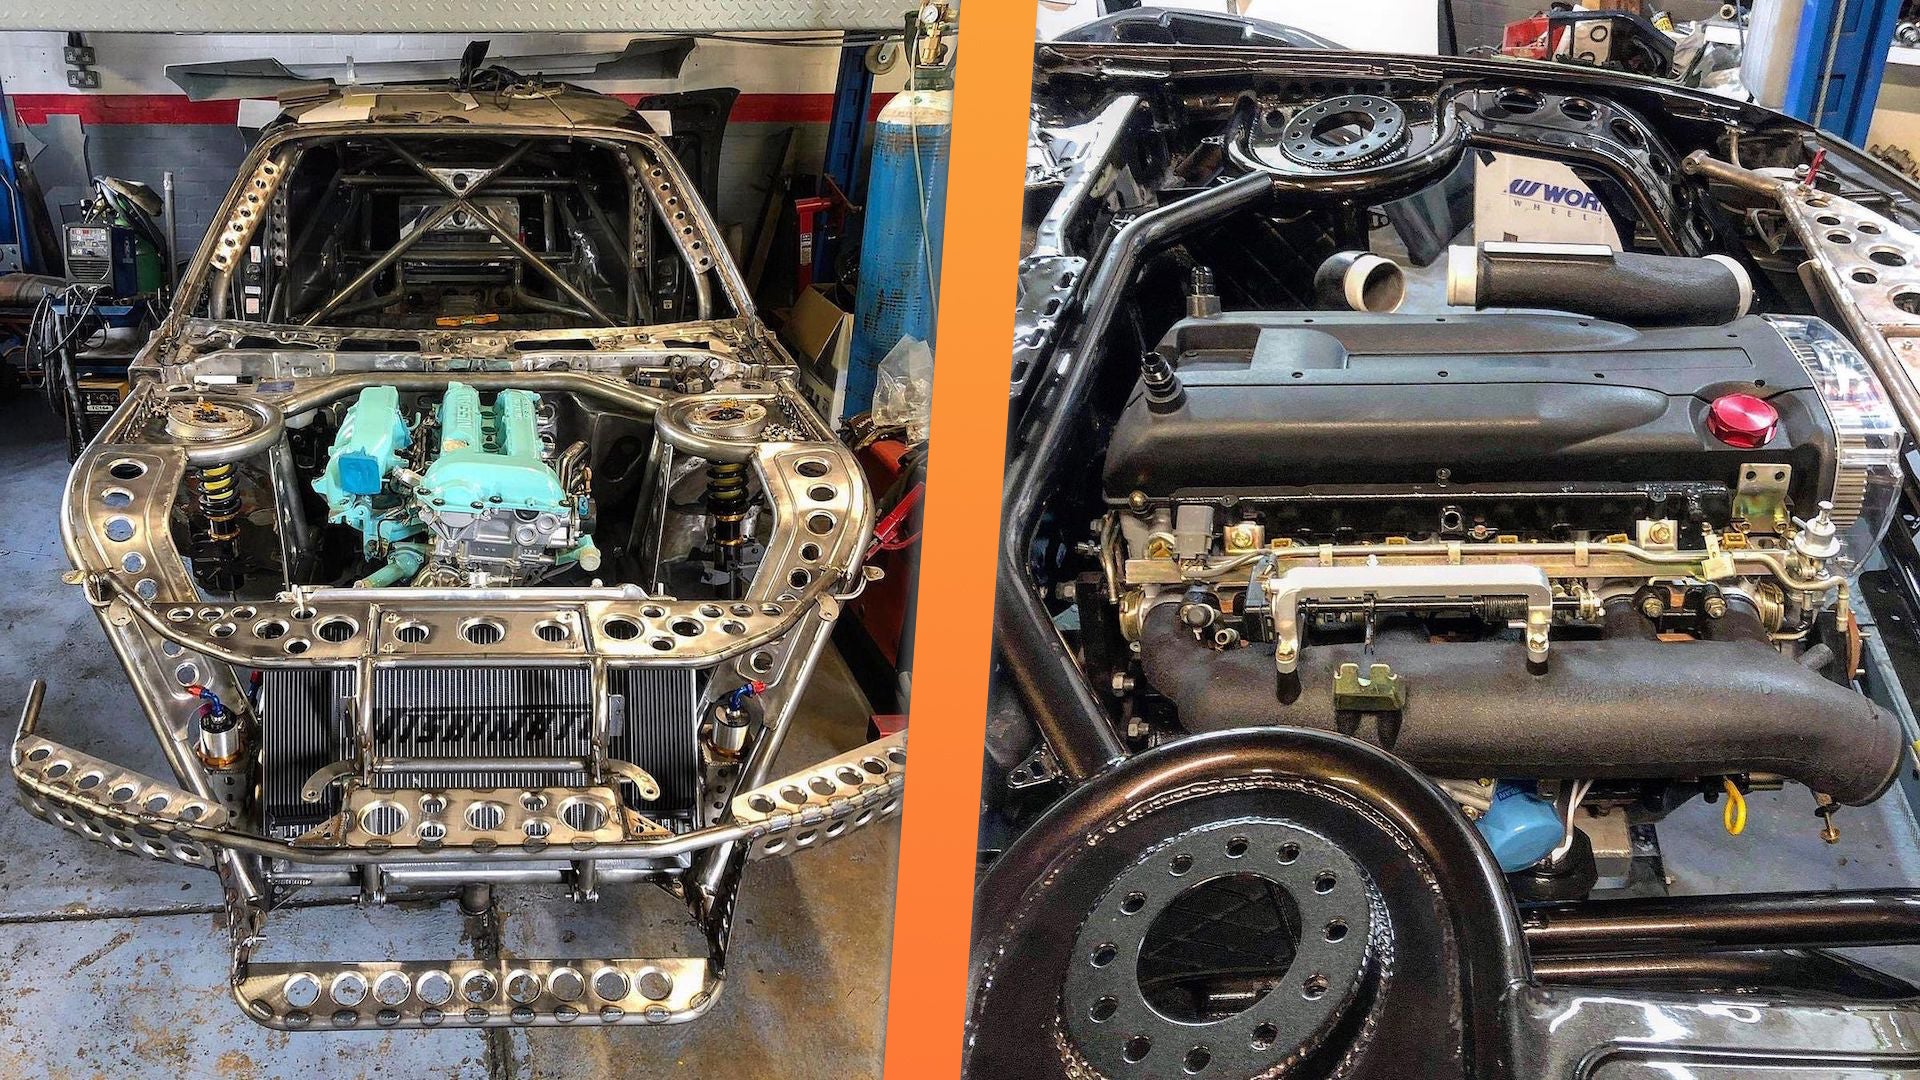 This Wild Nissan Silvia S15 Build Full of Speed Holes Has Taken Four Years…So Far